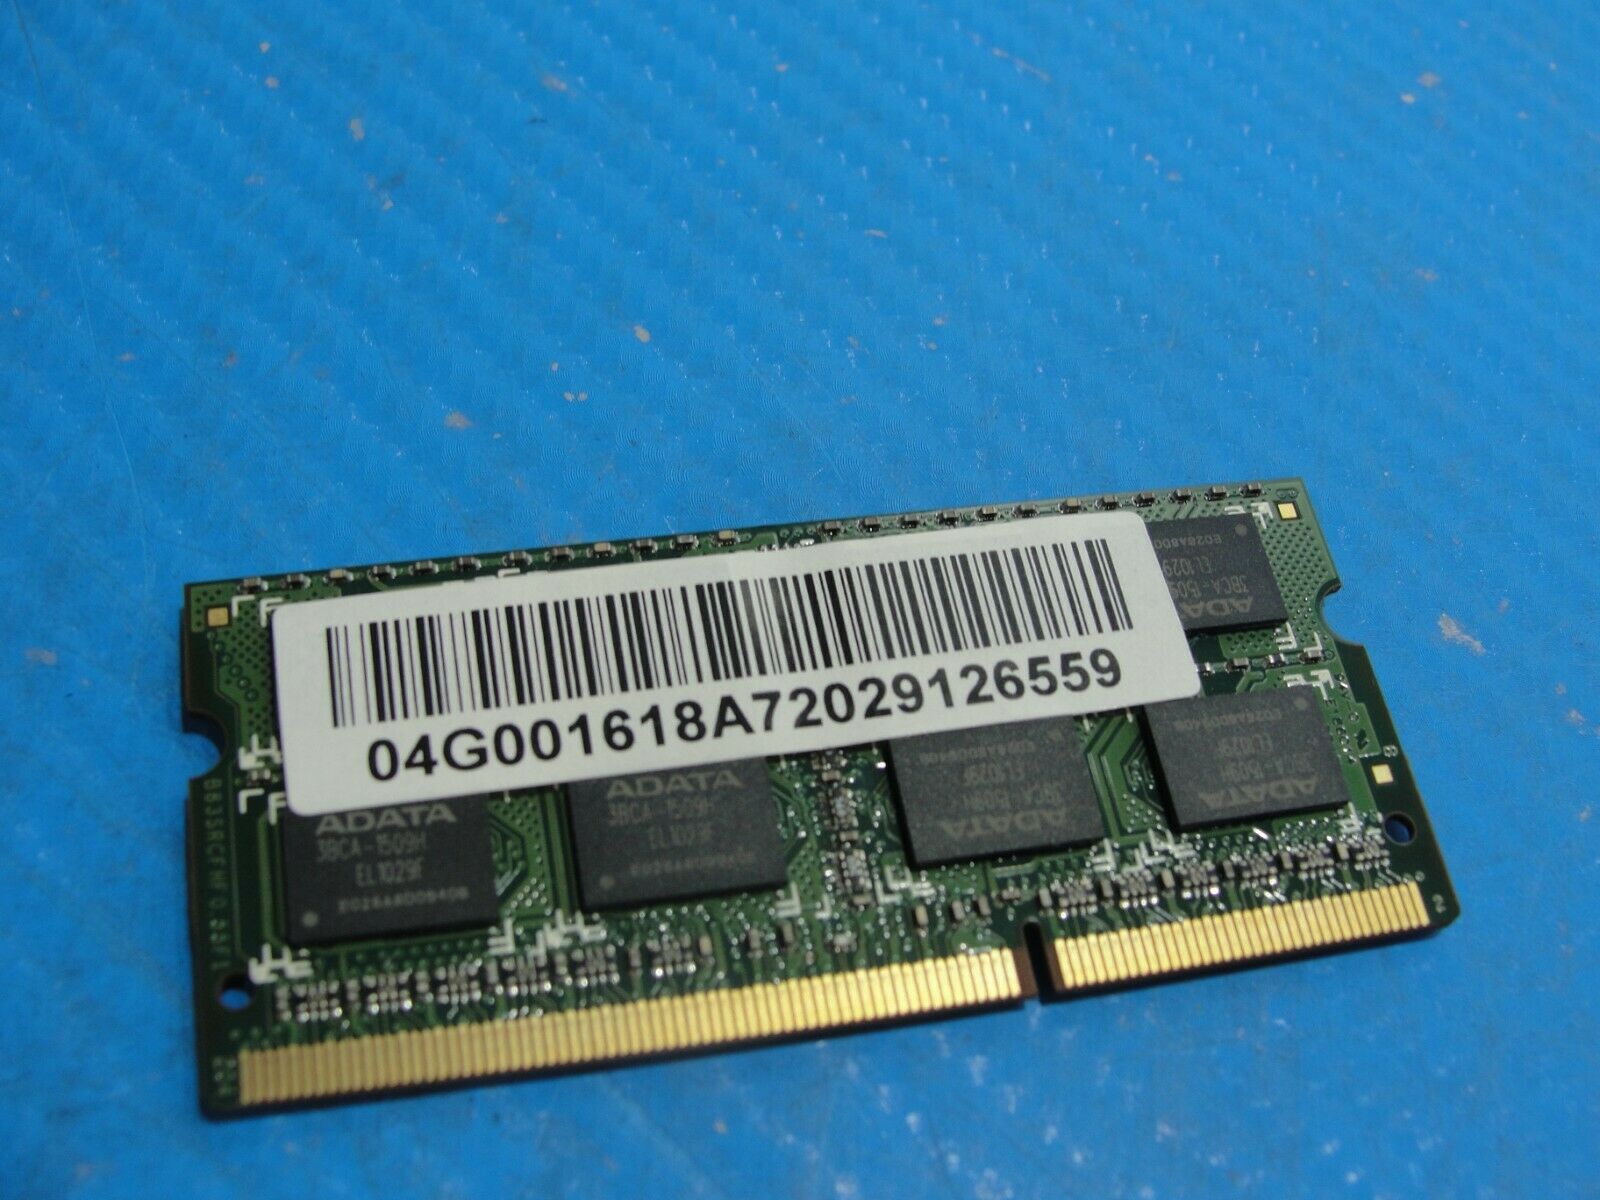 Asus G73JW ADATA 2GB SO-DIMM 2RX8 Memory RAM PC3-10600S AD73I1B1672EG - Laptop Parts - Buy Authentic Computer Parts - Top Seller Ebay